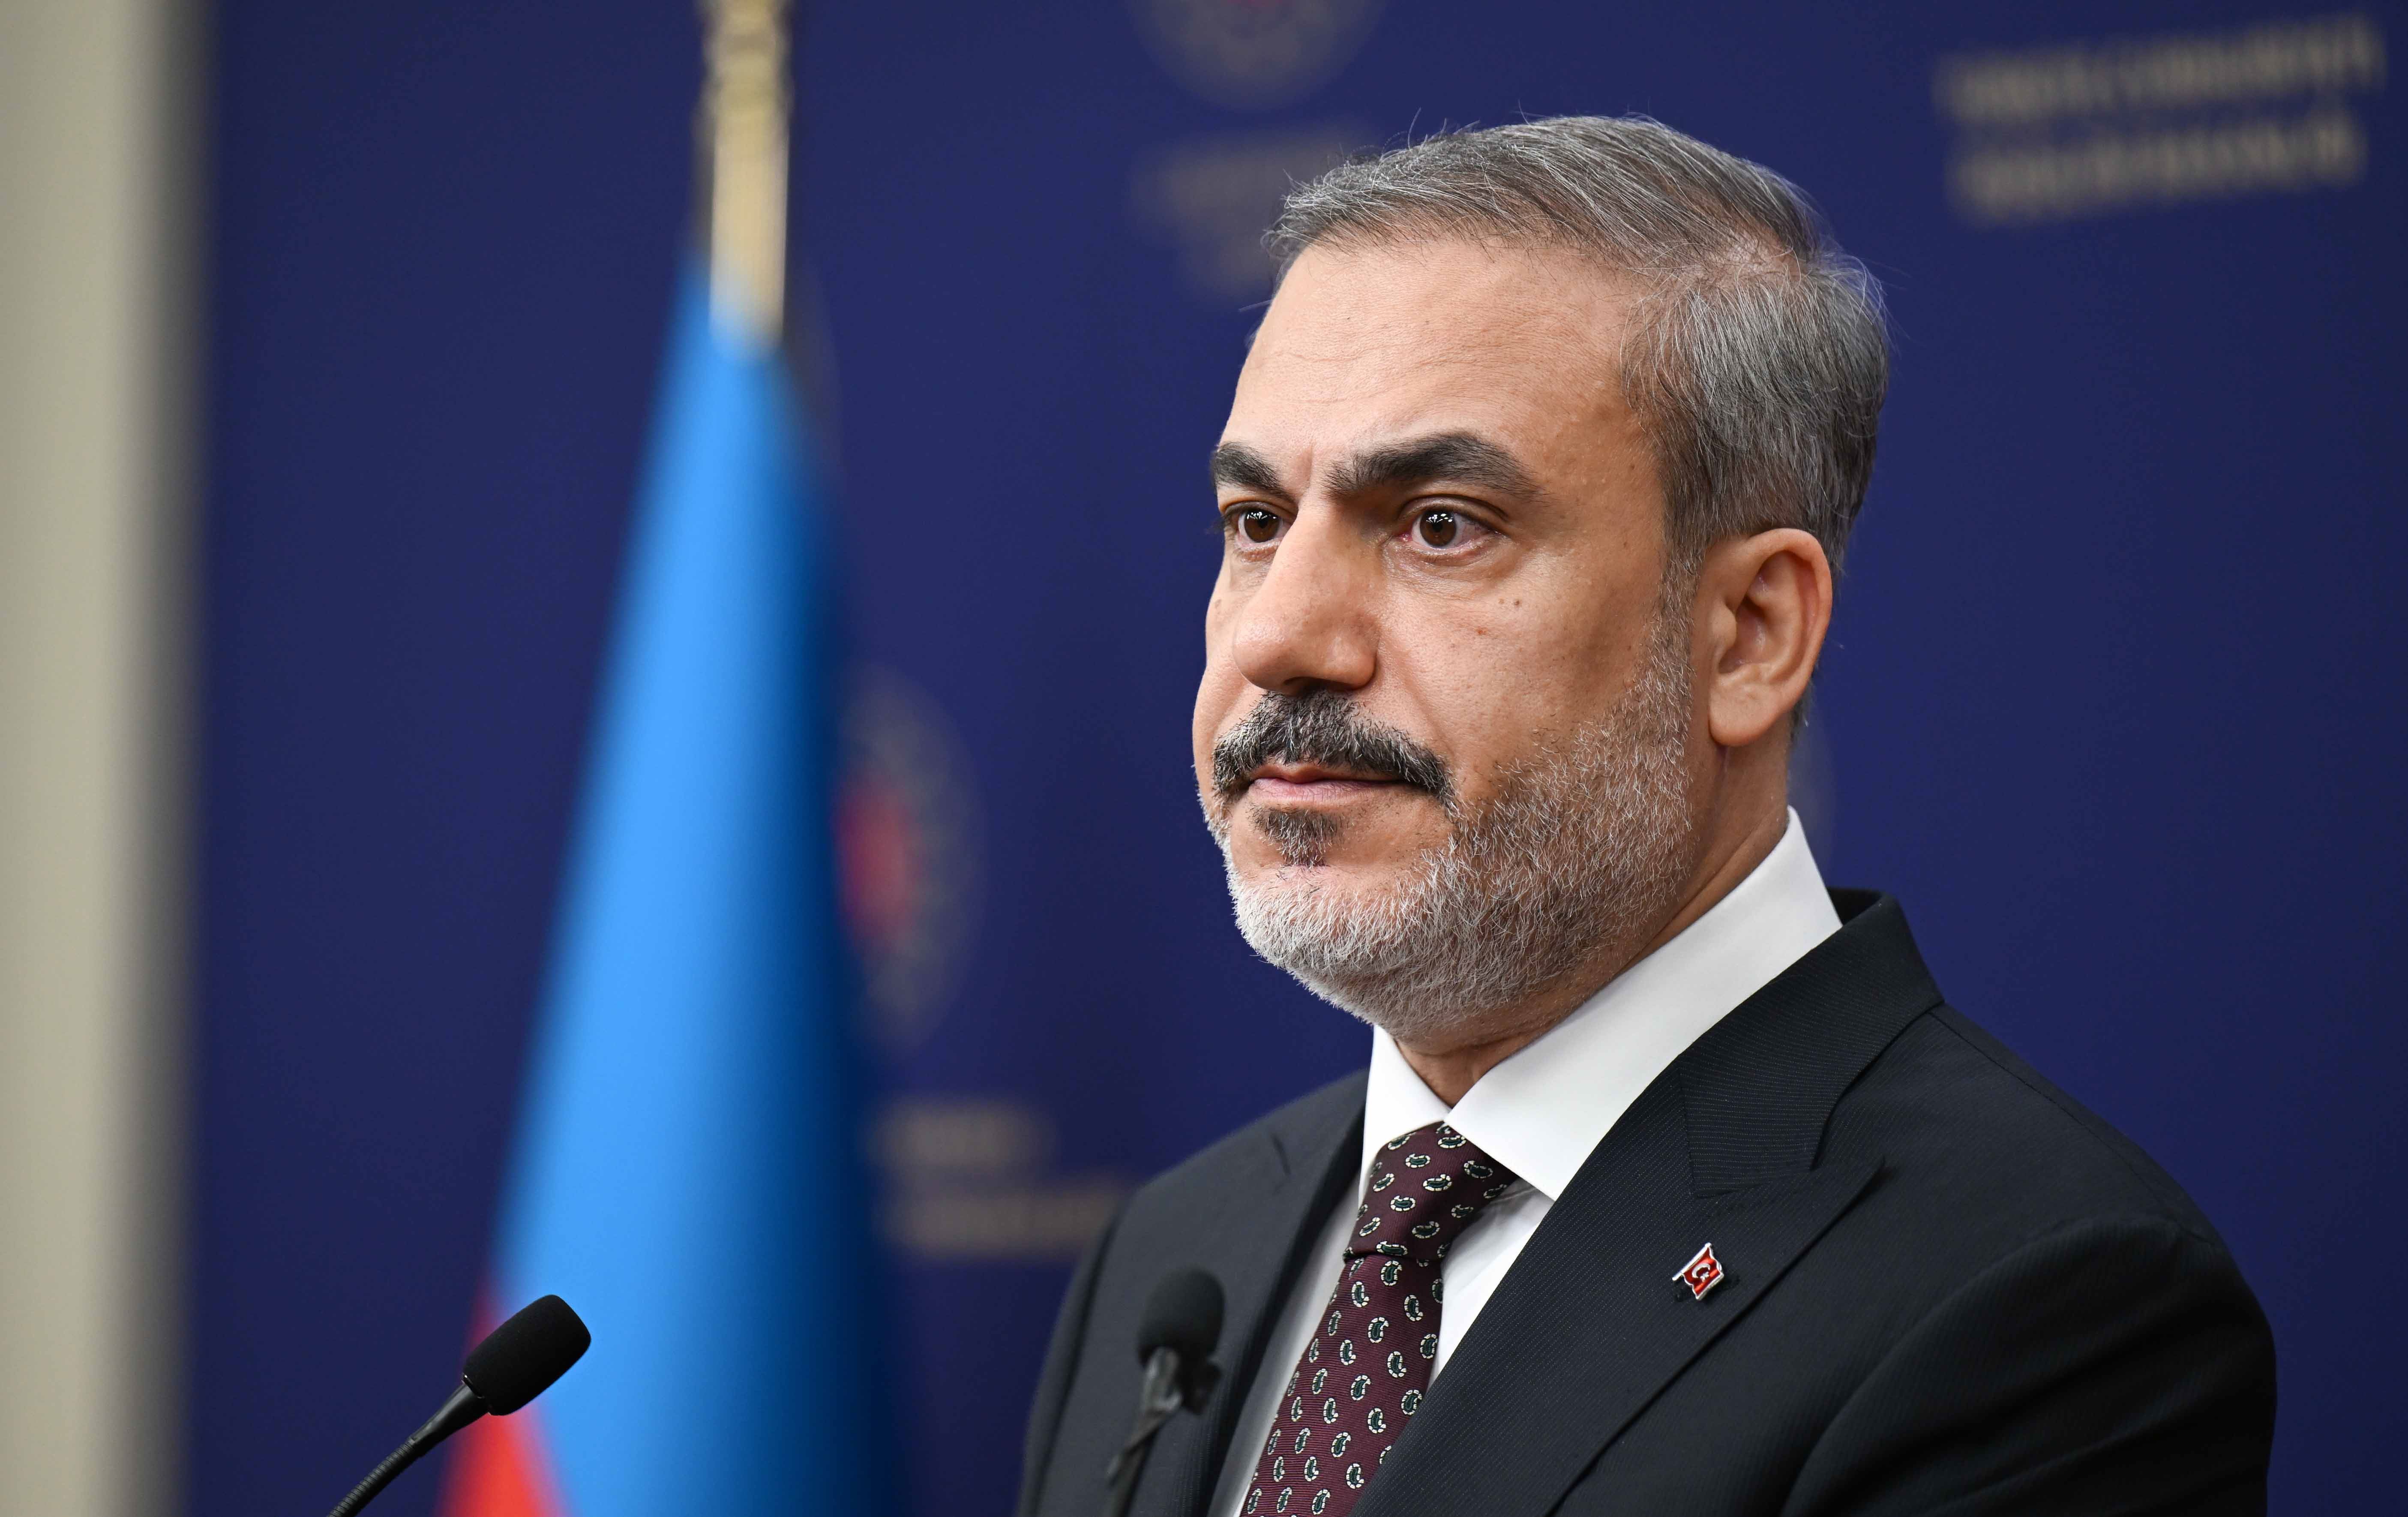 Top Turkish diplomat calls on West to distance itself from Israel